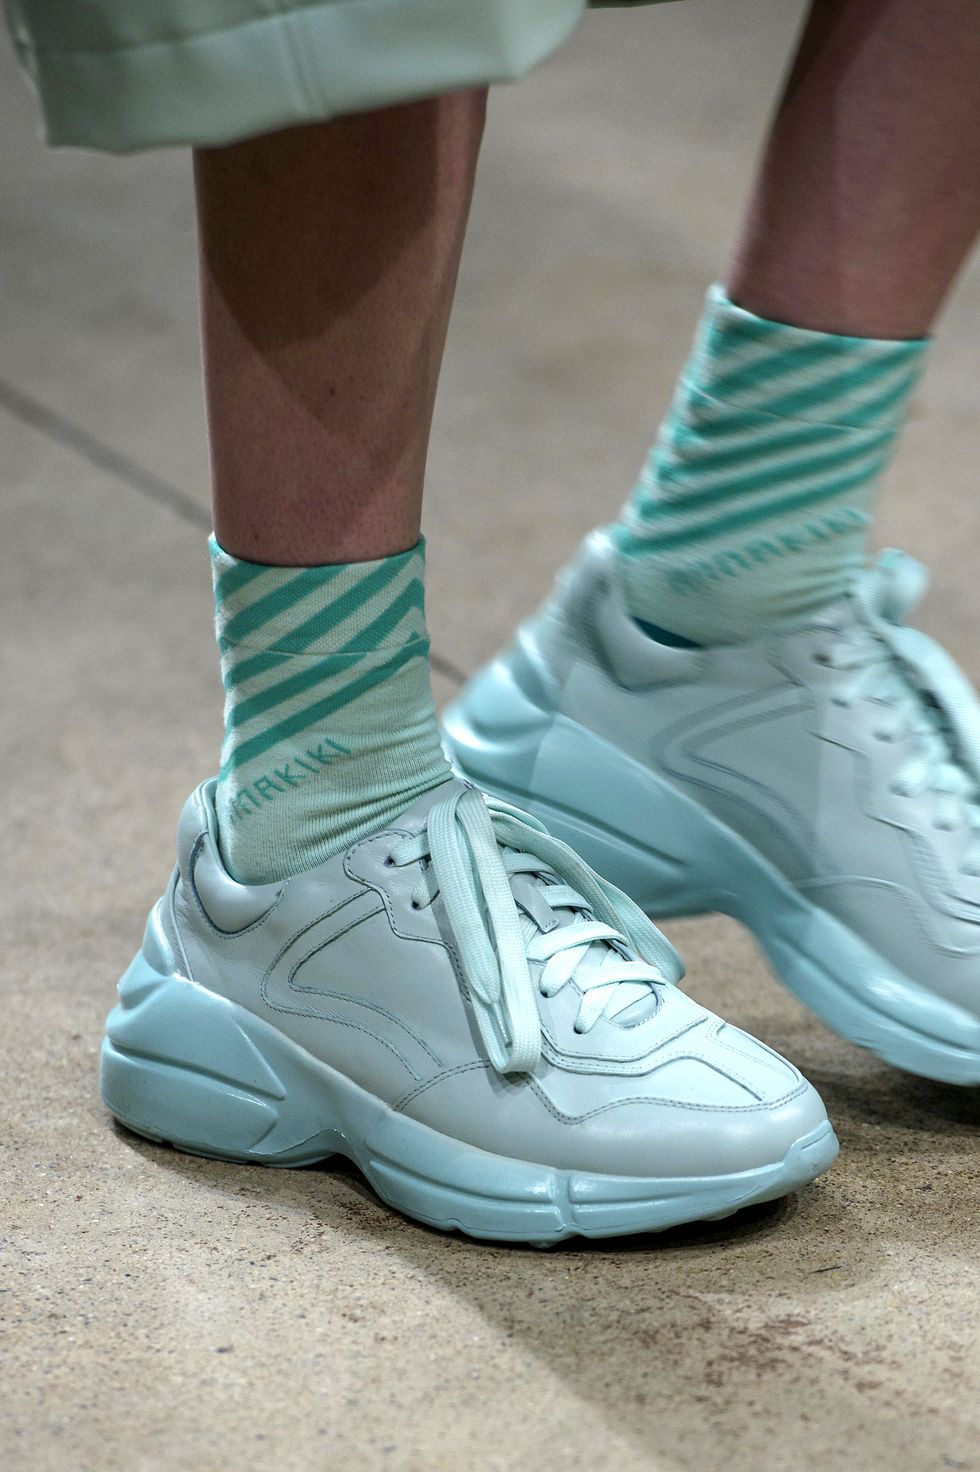 Footwear, Green, White, Shoe, Blue, Turquoise, Aqua, Teal, Pink, Ankle, 